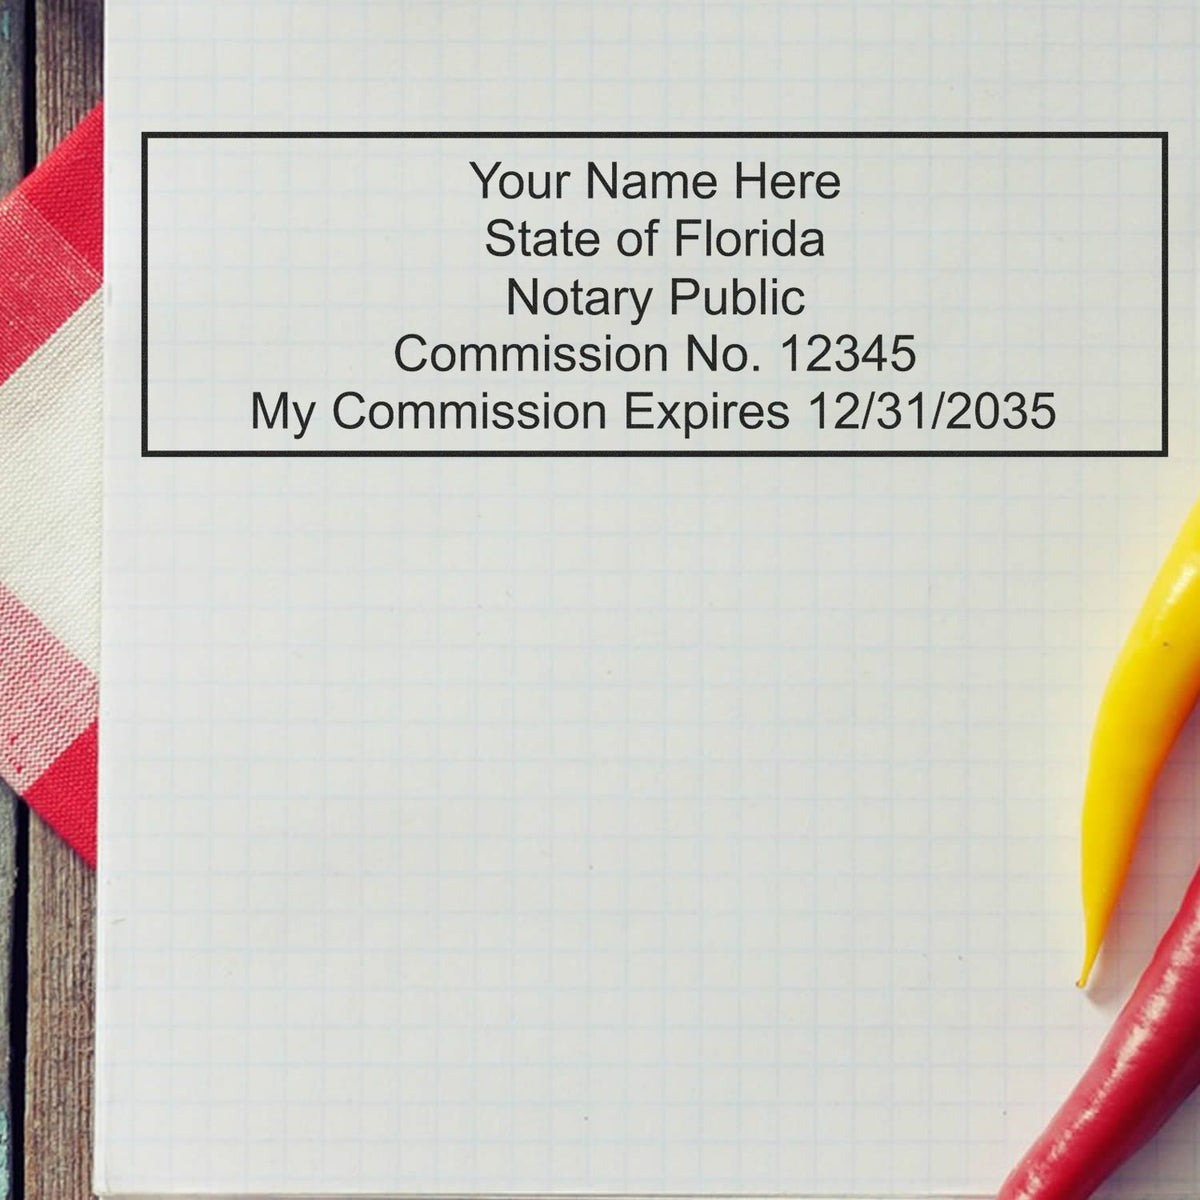 An alternative view of the Slim Pre-Inked Rectangular Notary Stamp for Florida stamped on a sheet of paper showing the image in use